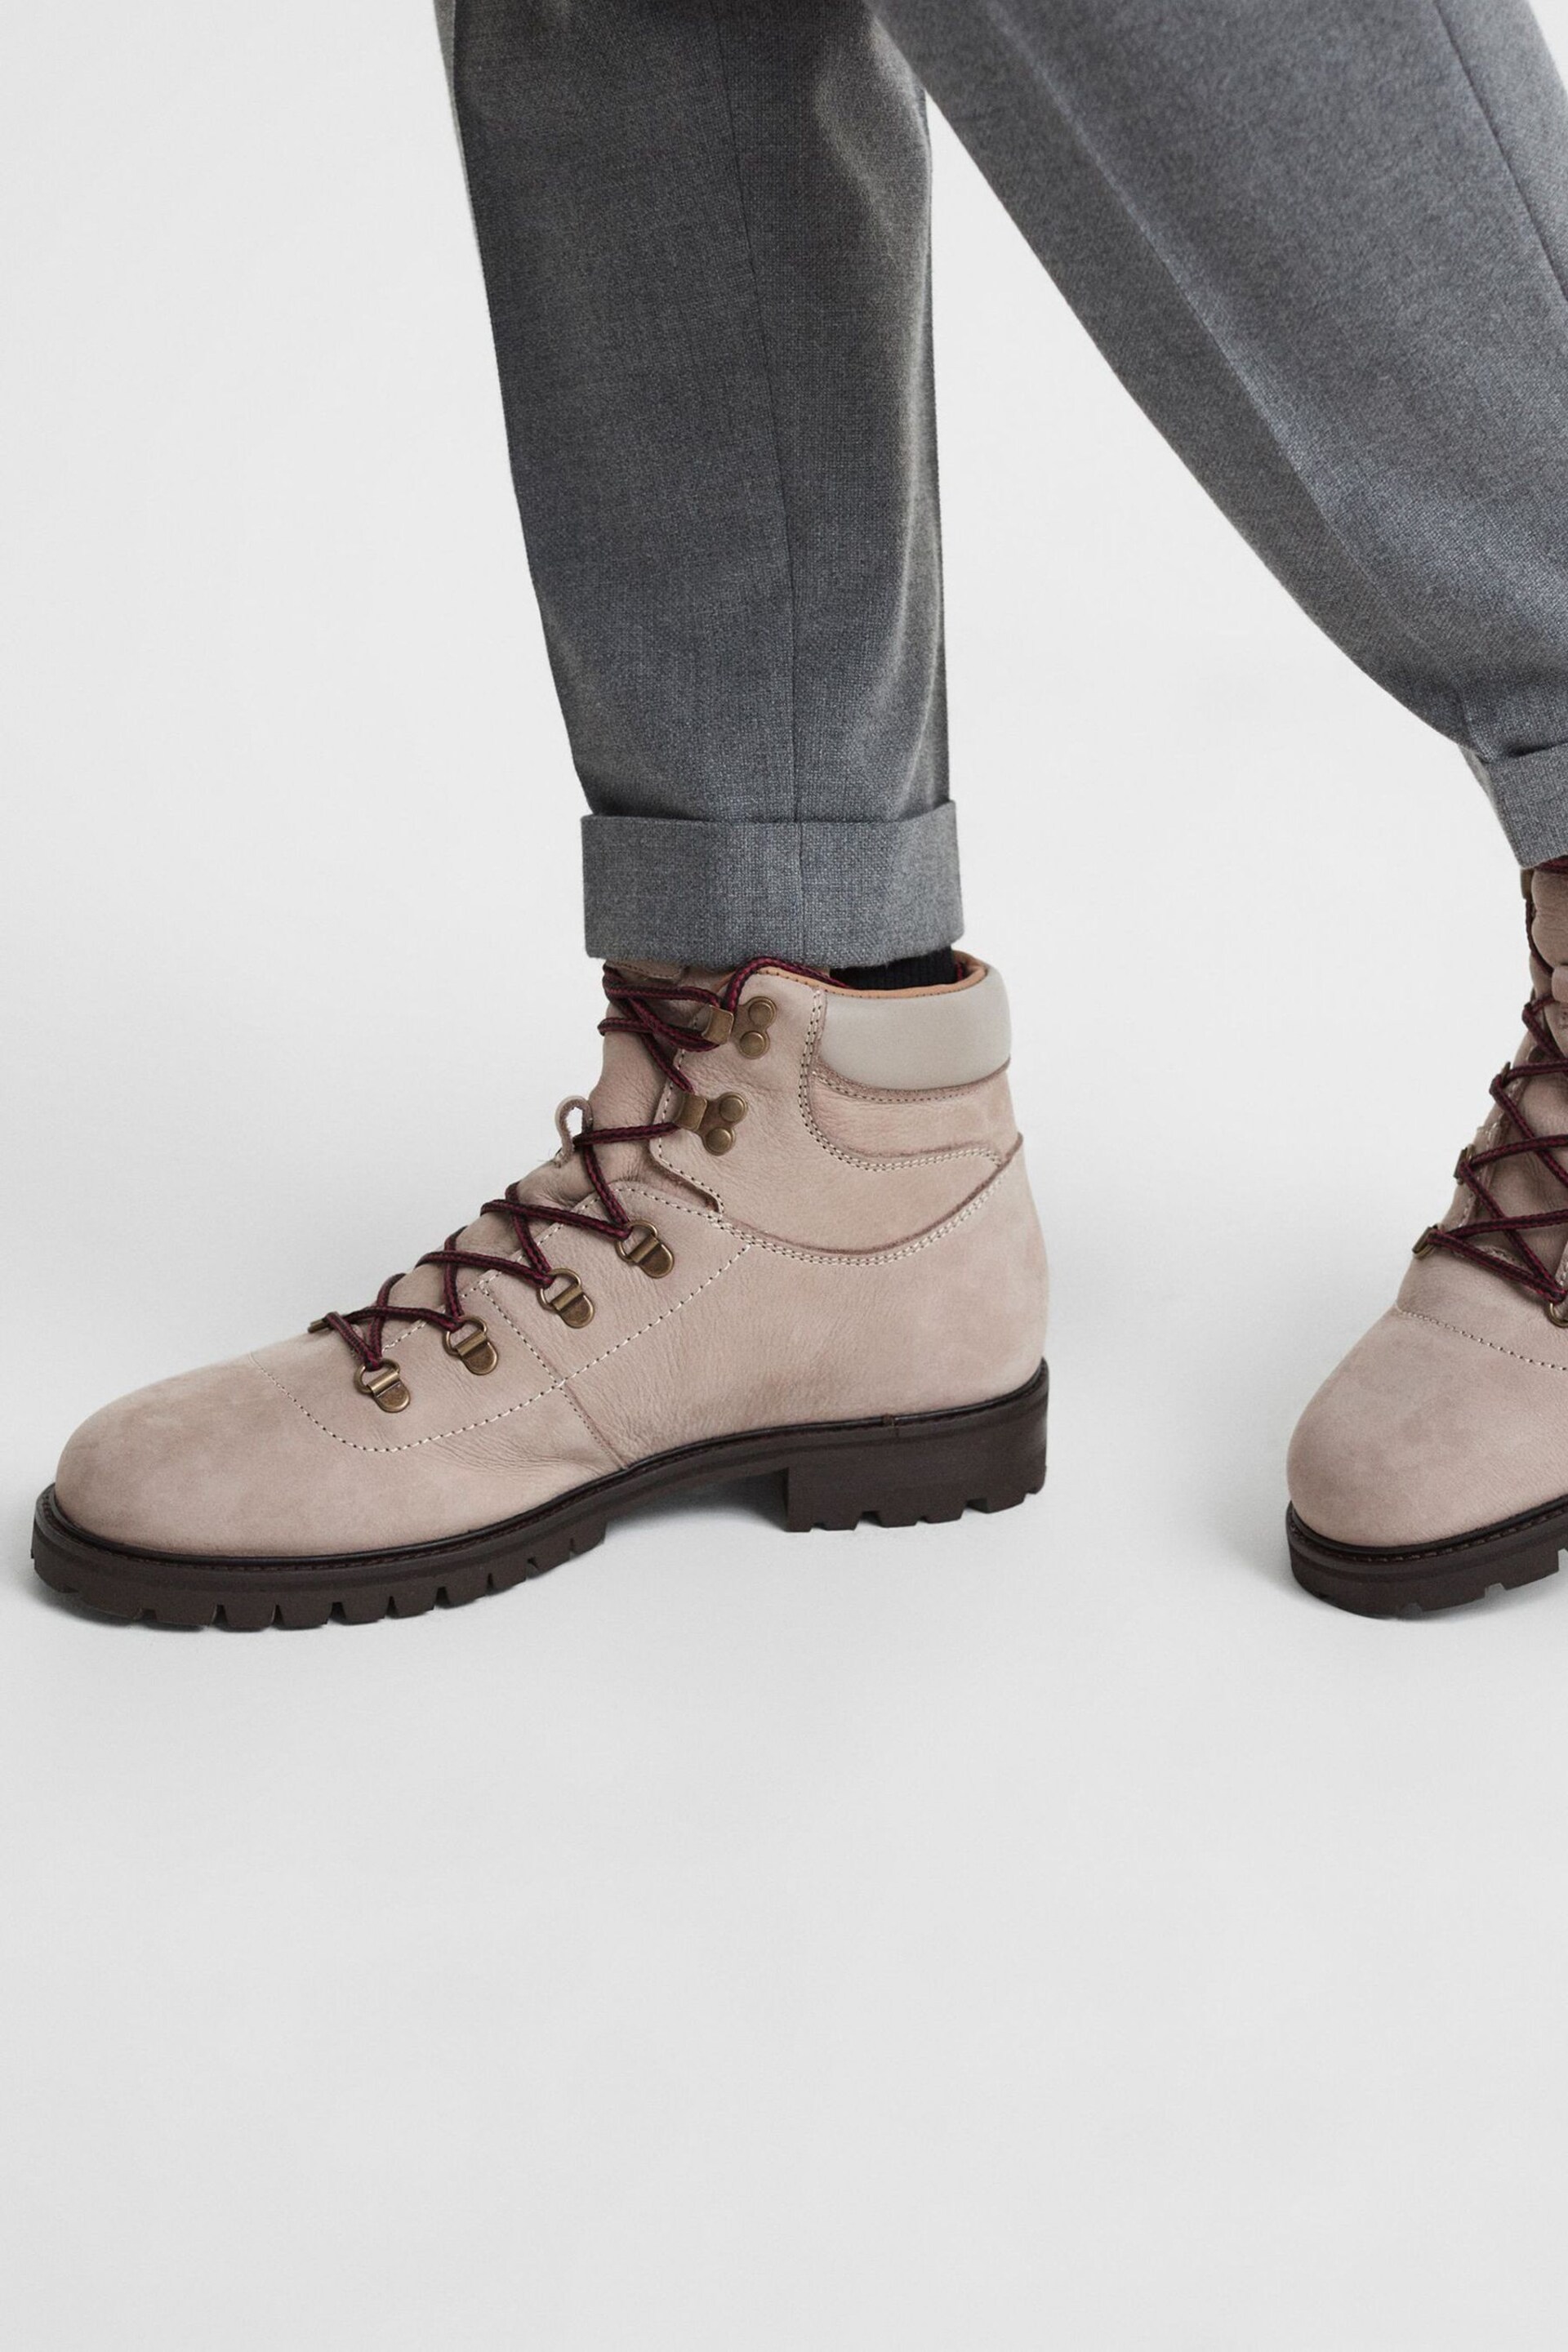 Reiss Stone Ashdown Leather Hiking Boots - Image 6 of 6